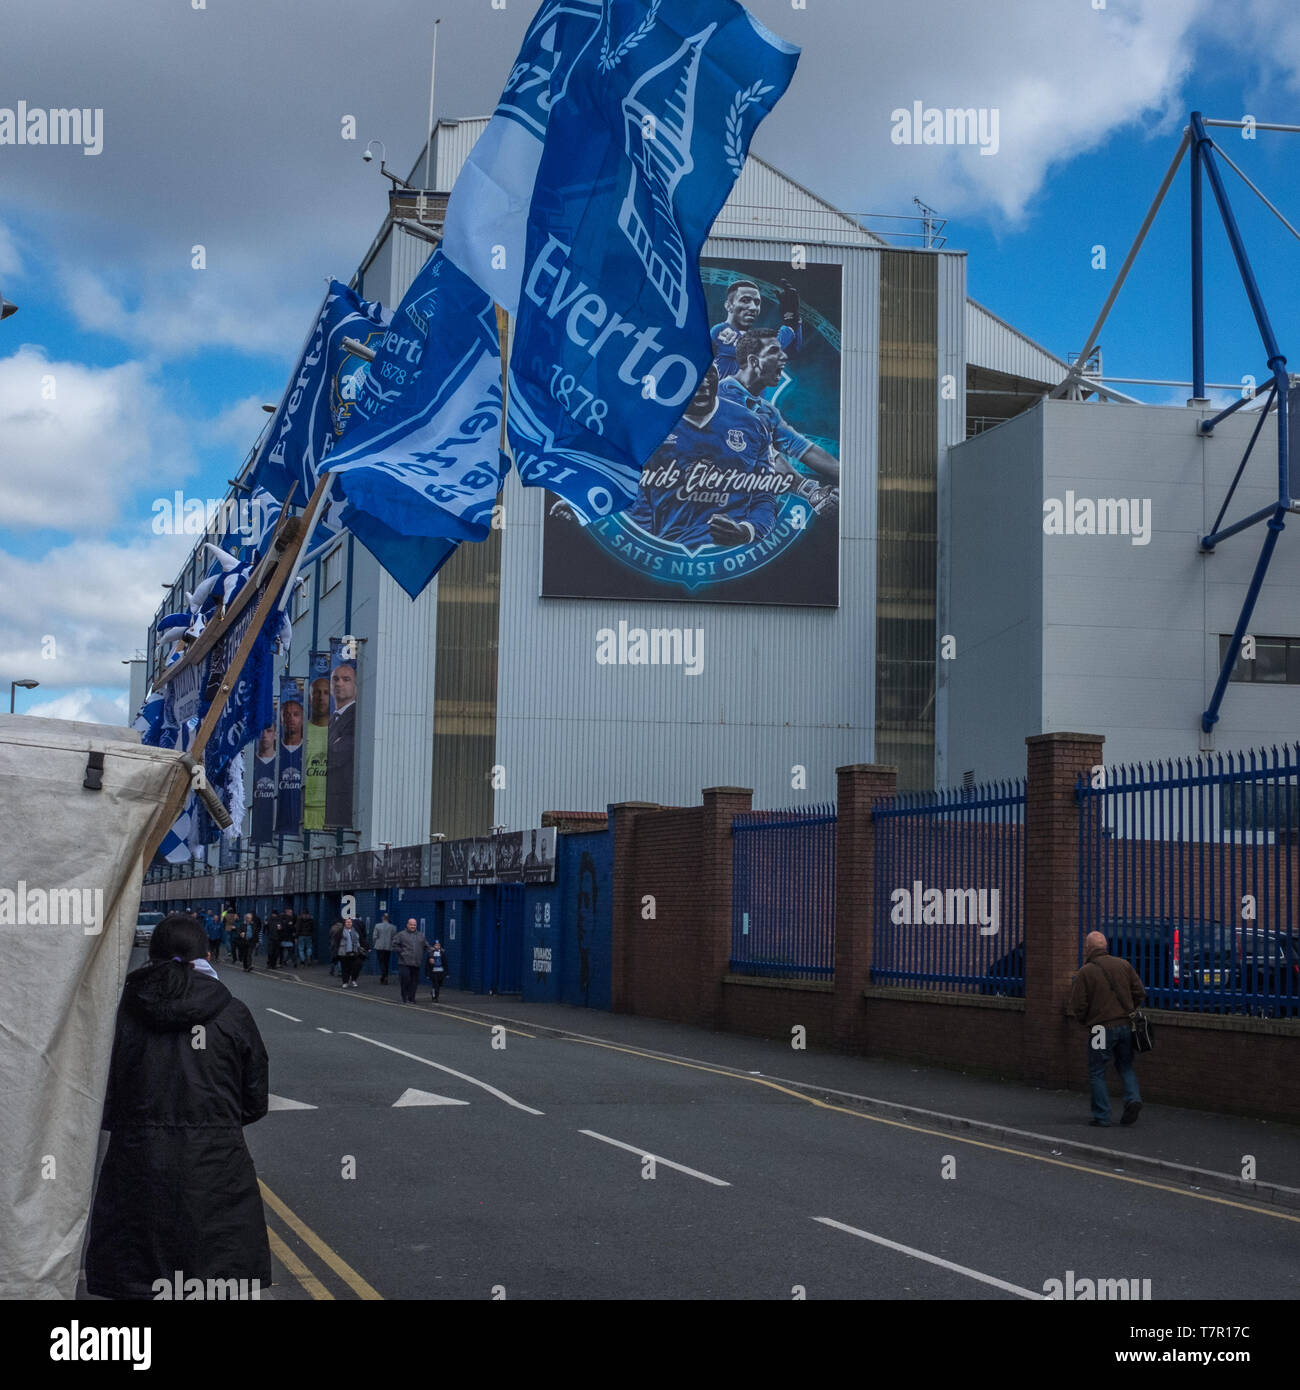 Everton, Liverpool, UK, April, 17, 2016: Crowds of supporters start to gather in the streets at Everton Football Club for a premiership game versus Southampton, flags and scarfs  in the Everton colours can be seen, against a bright blue sky Stock Photo